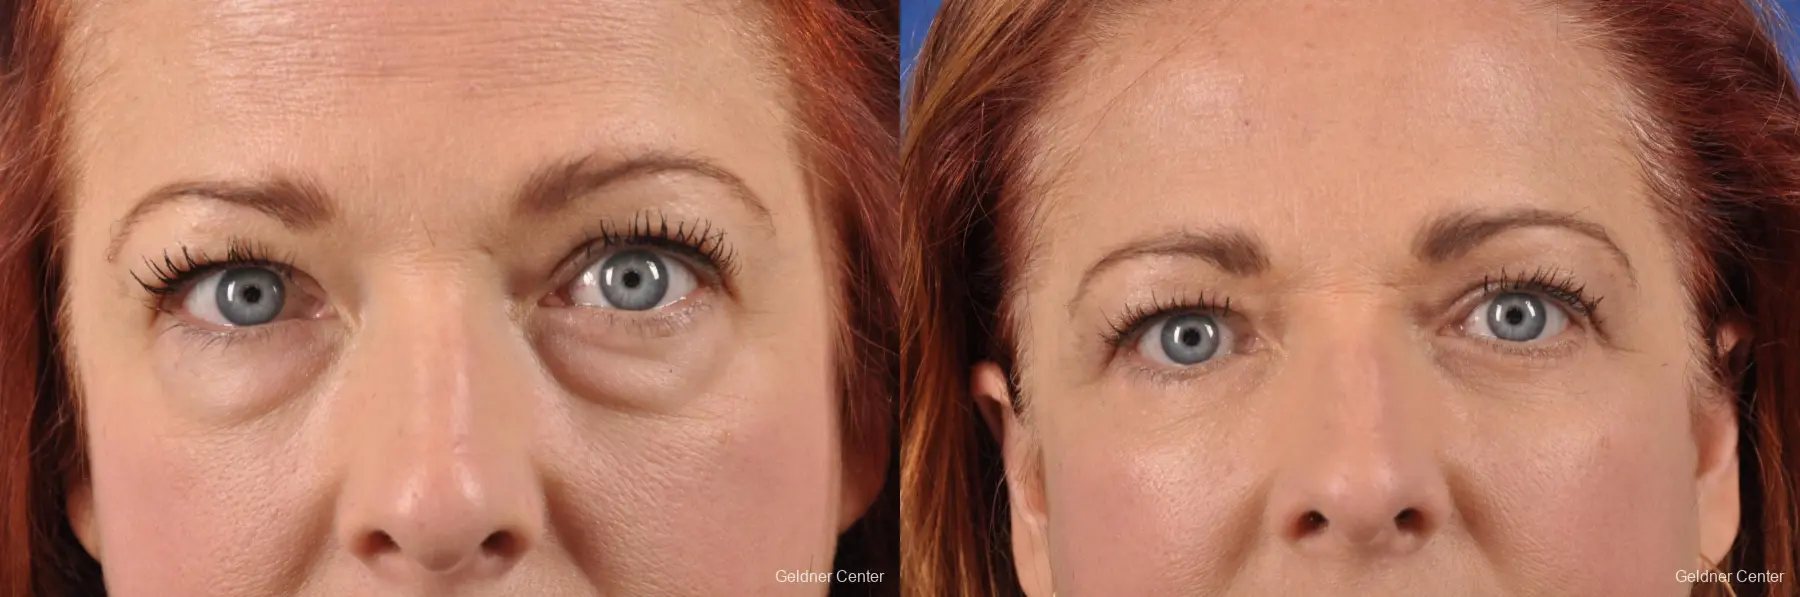 Lower Blepharoplasty with Fat Transposition - Before and After